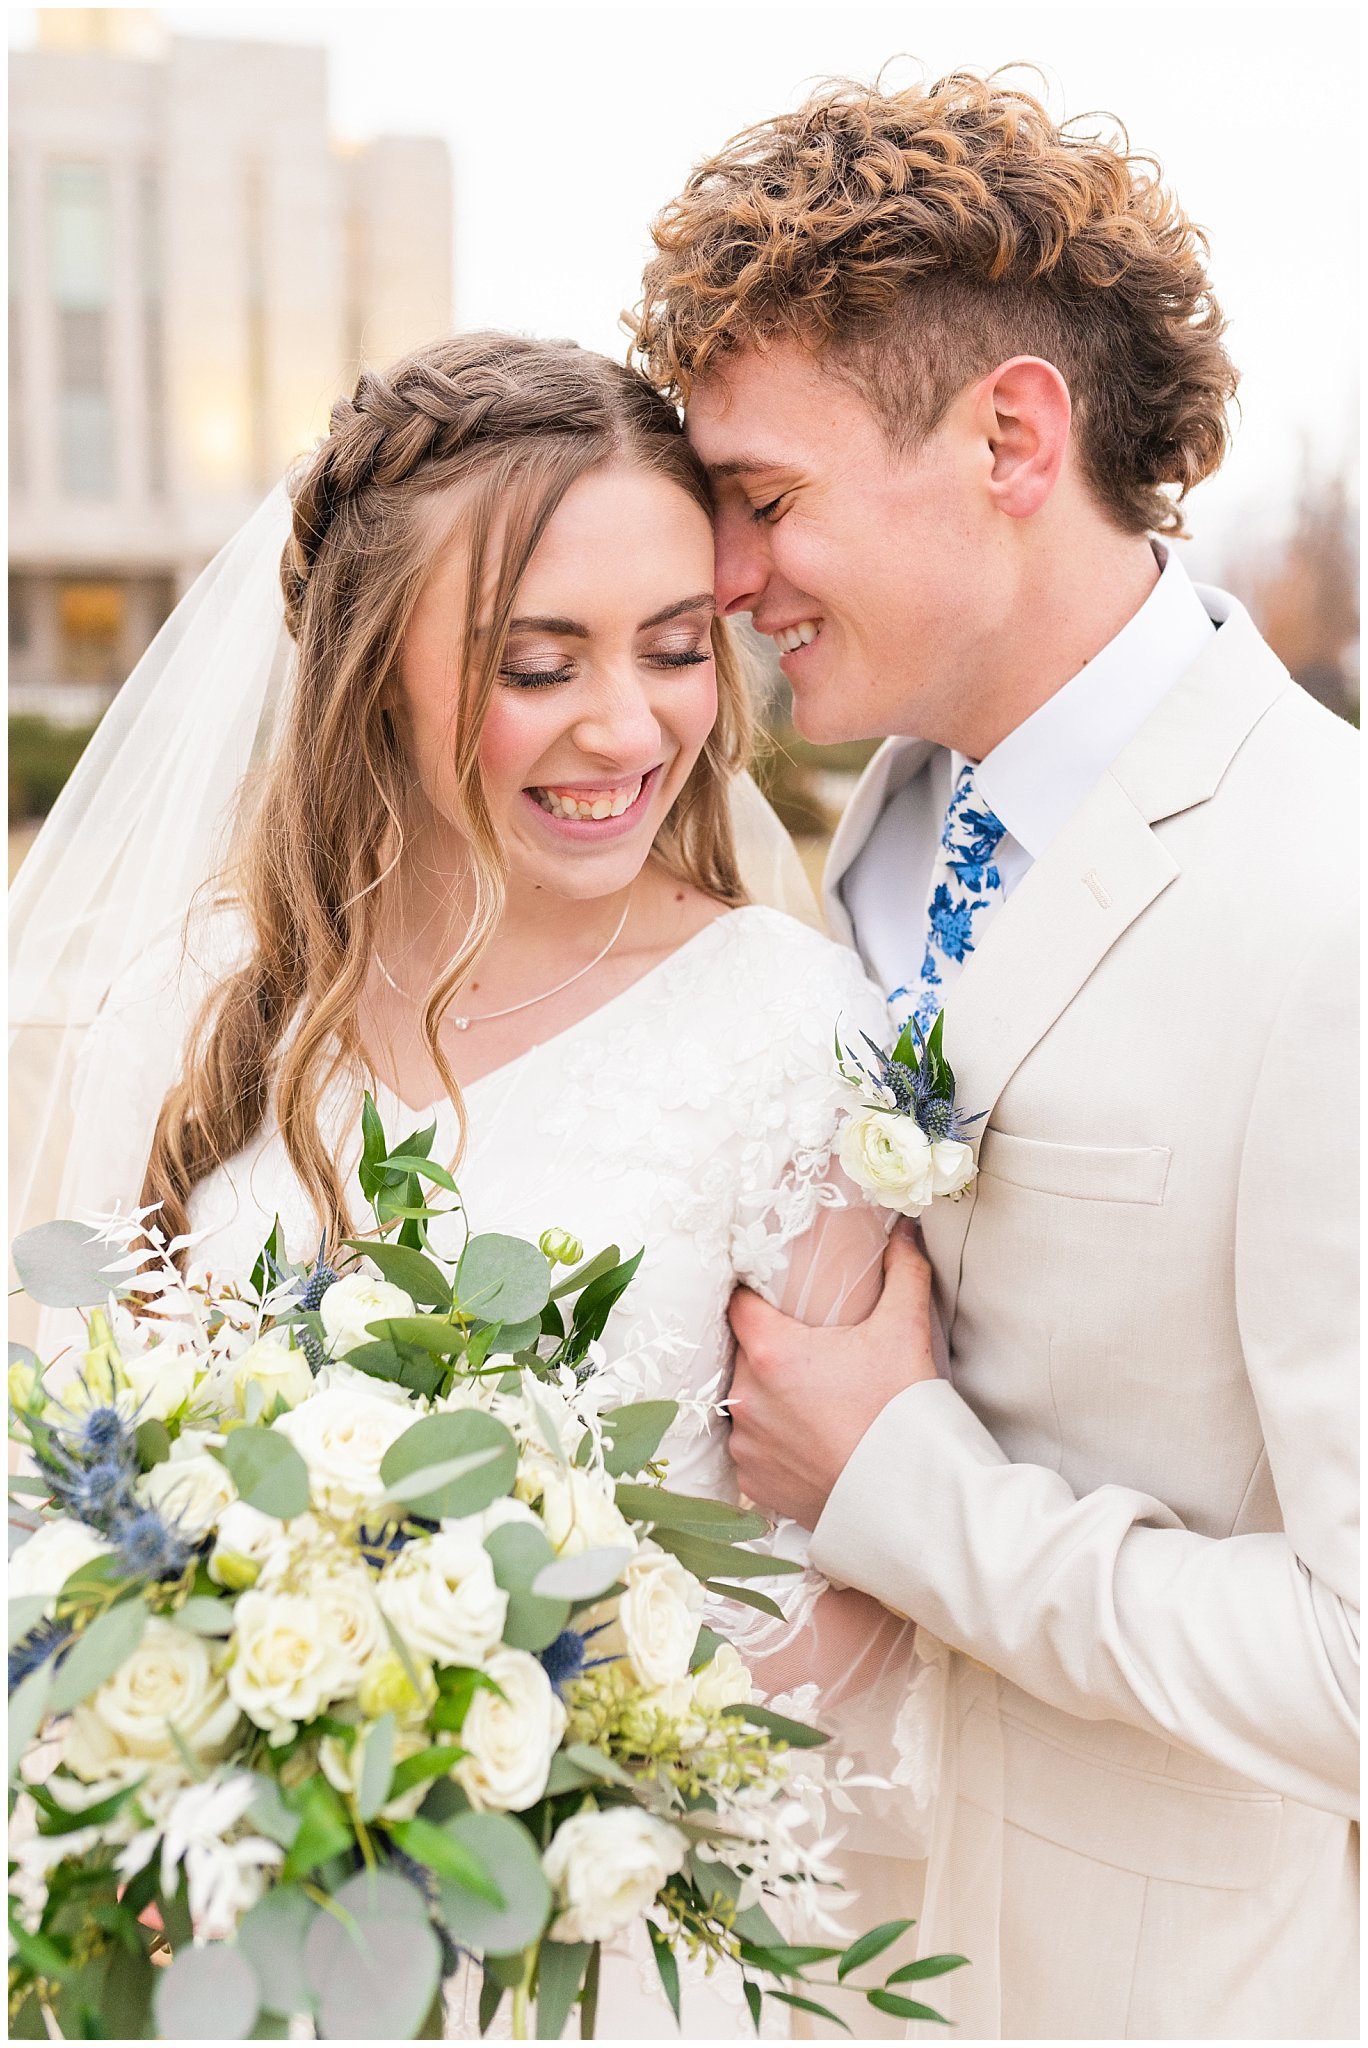 Bride and groom portraits at the temple. Groom in cream colored suit with blue floral tie and bride with lace dress and white floral bouquet. | Oquirrh Mountain Temple and Draper Day Barn Winter Wedding | Jessie and Dallin Photography